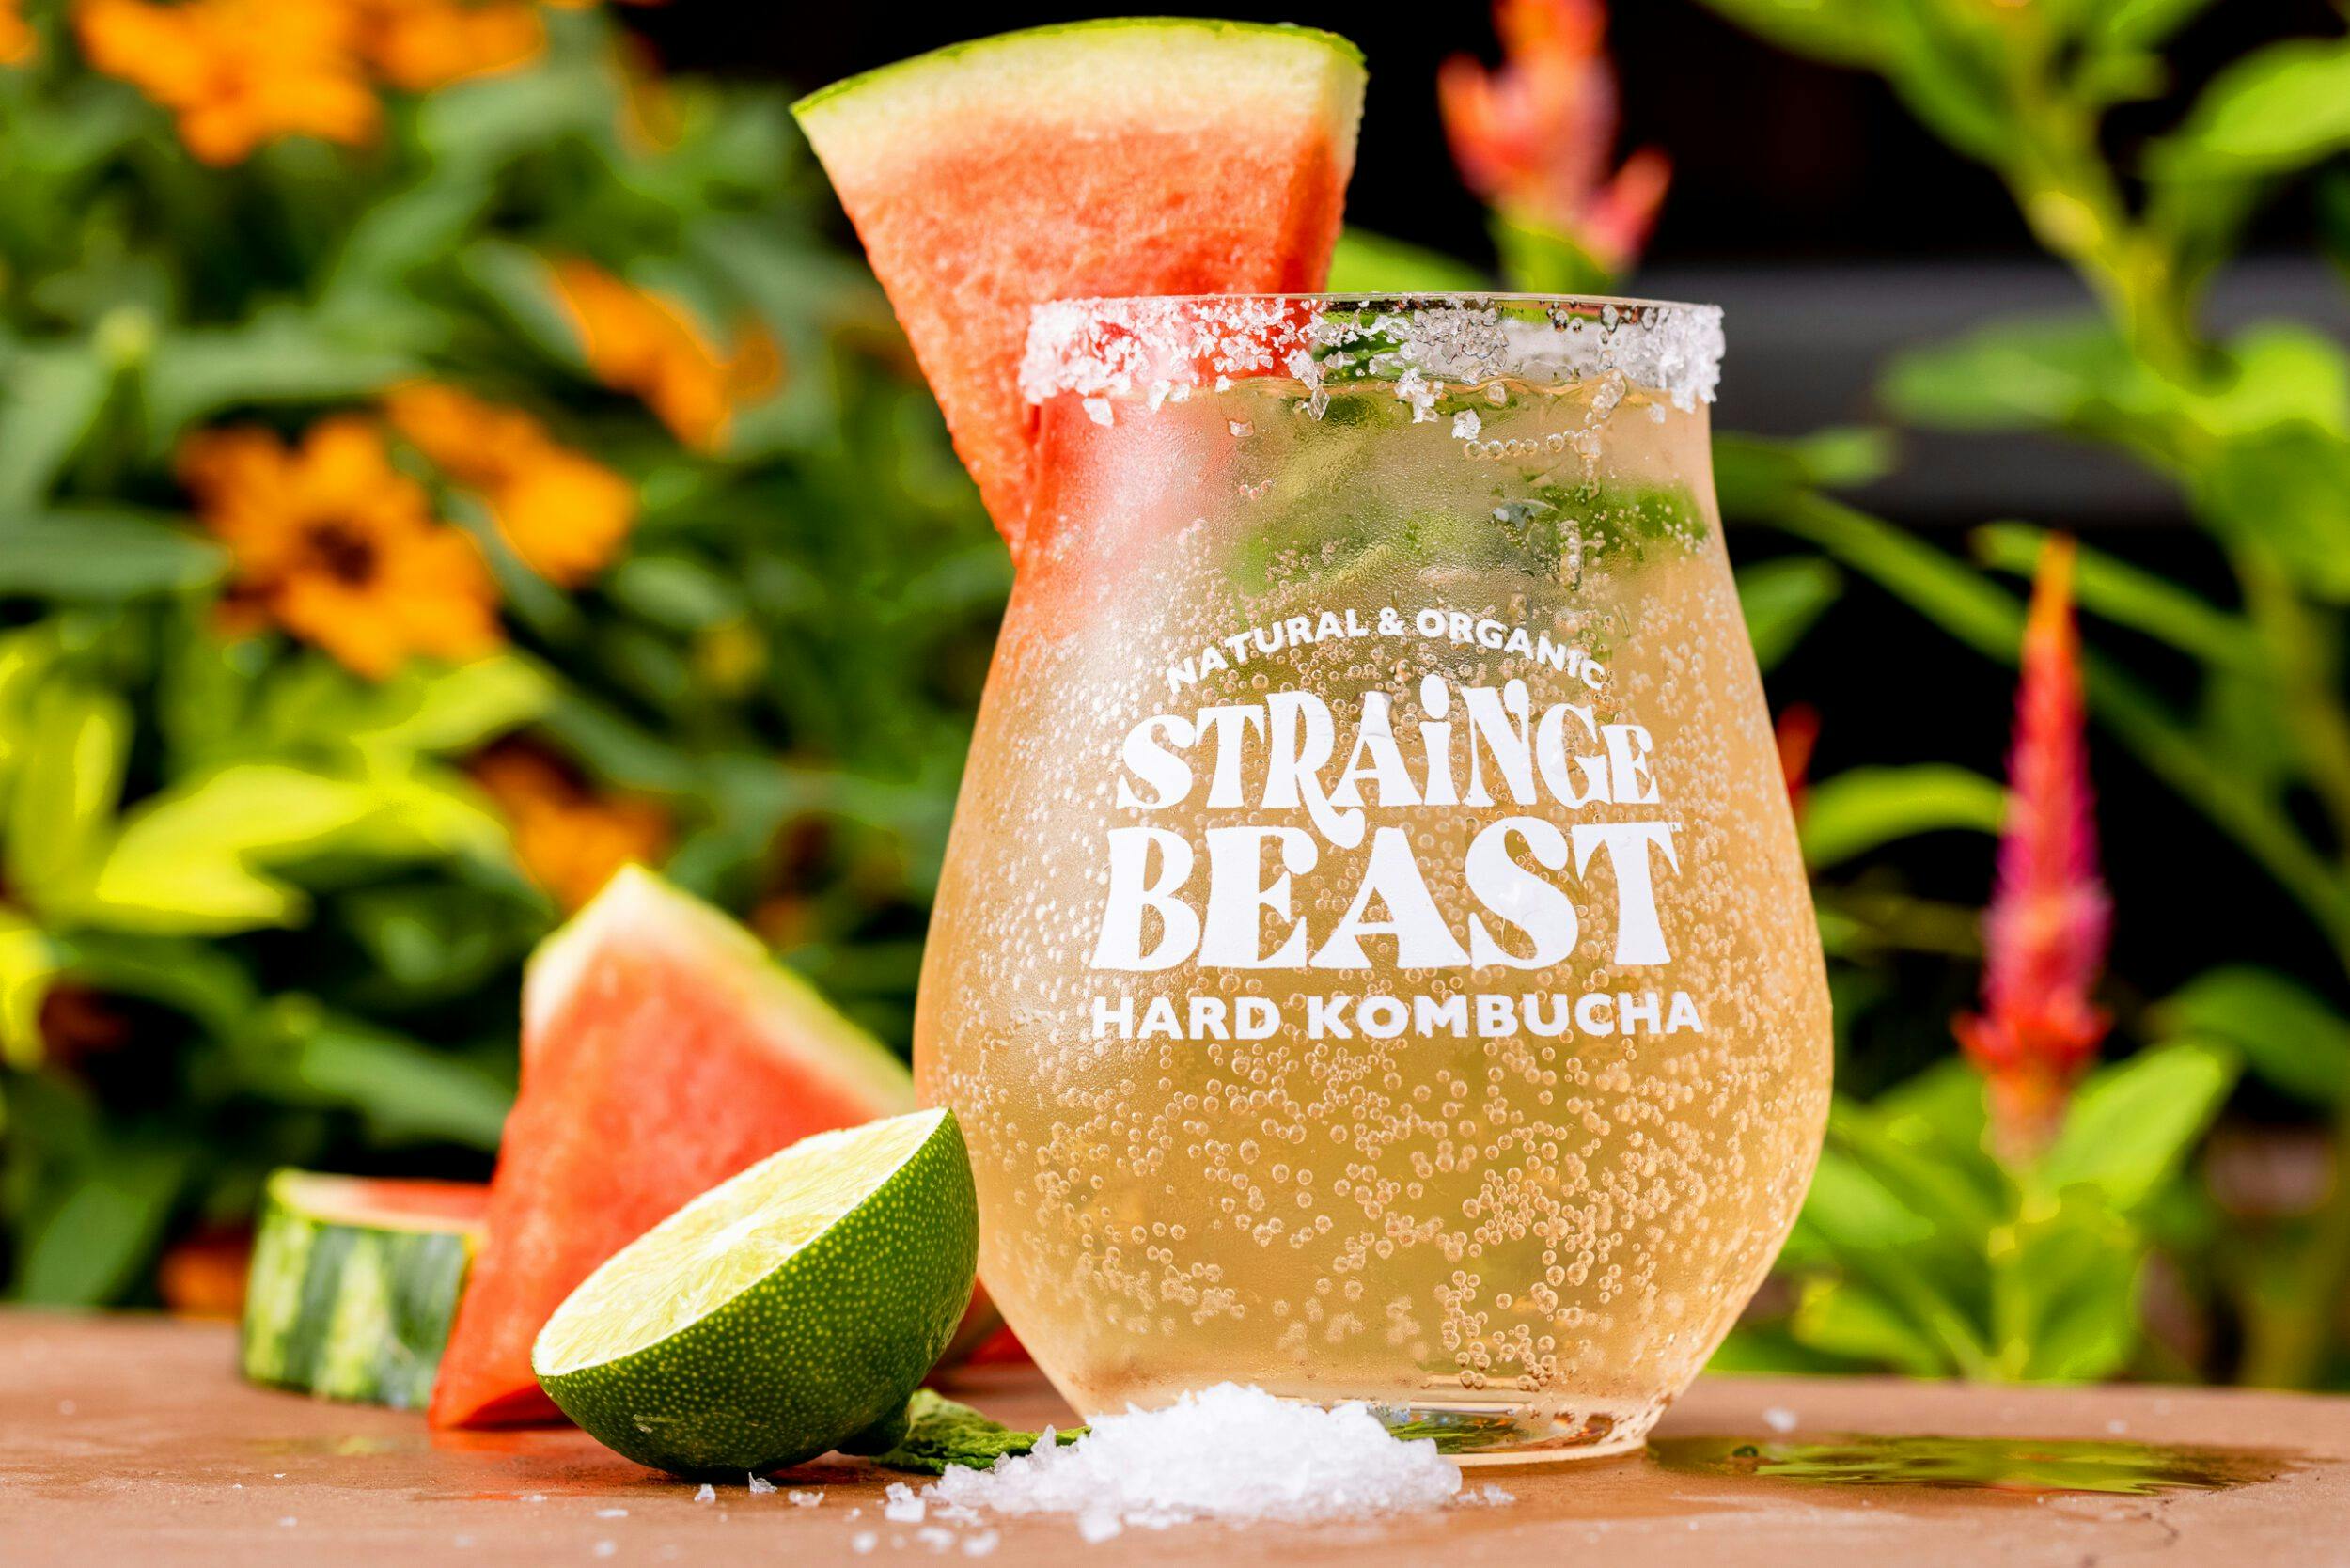 A freshly poured glass of Strainge Beast Watermelon, Sea Salt, Lime and Mint kombucha in a glass surrounded by fresh slices of watermelon